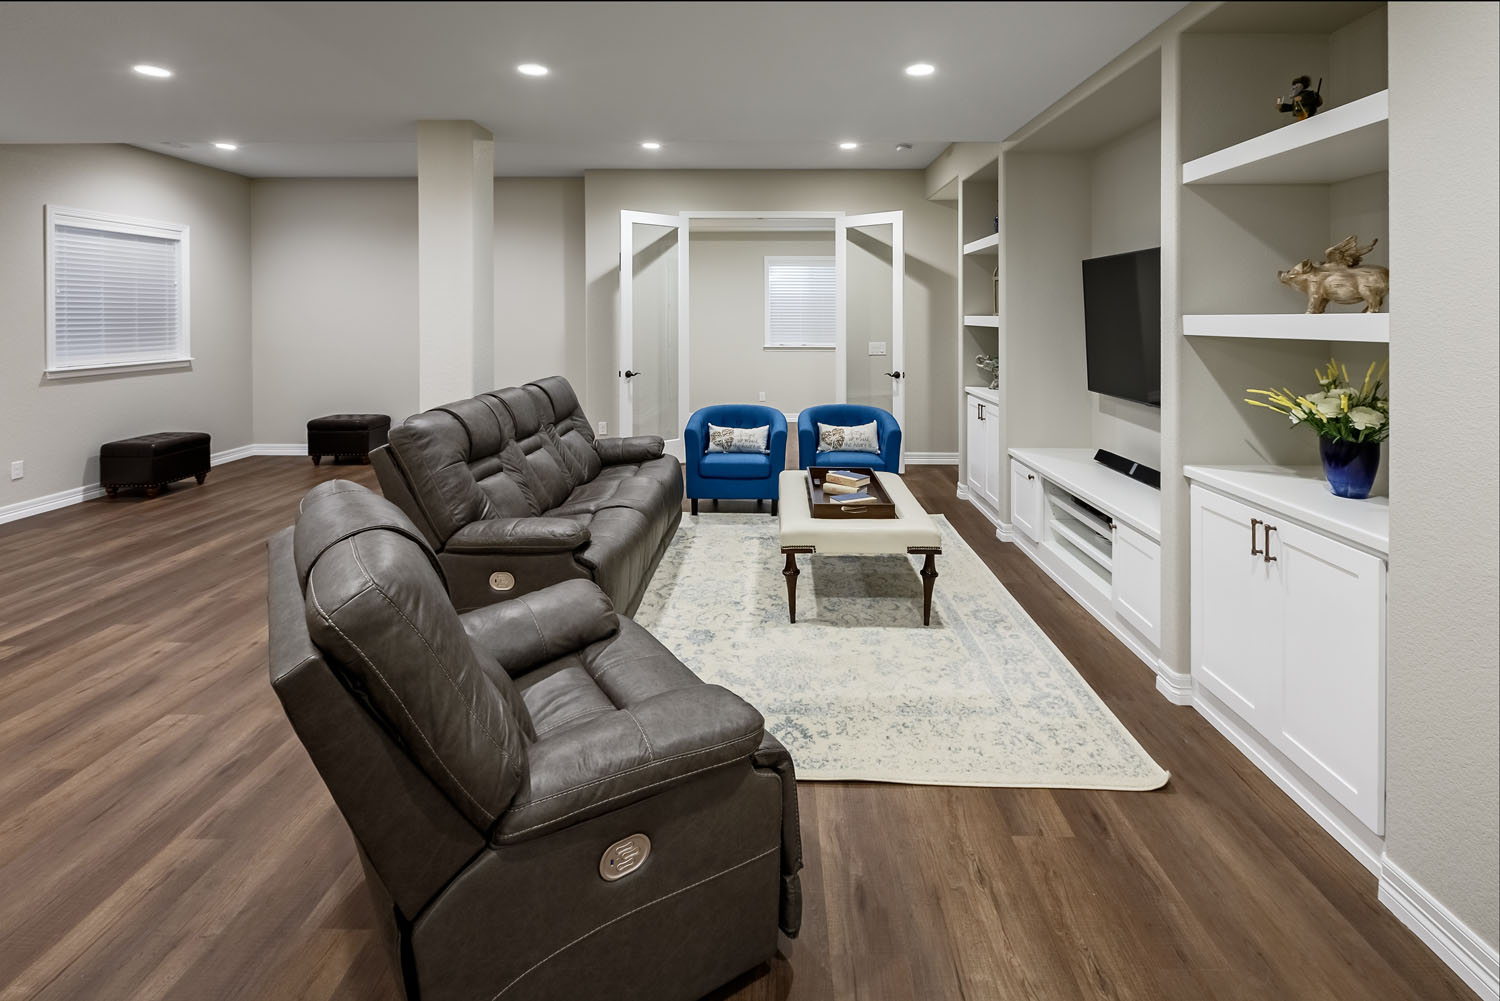 4 Awesome Things You Can Do With Your Finished Basement